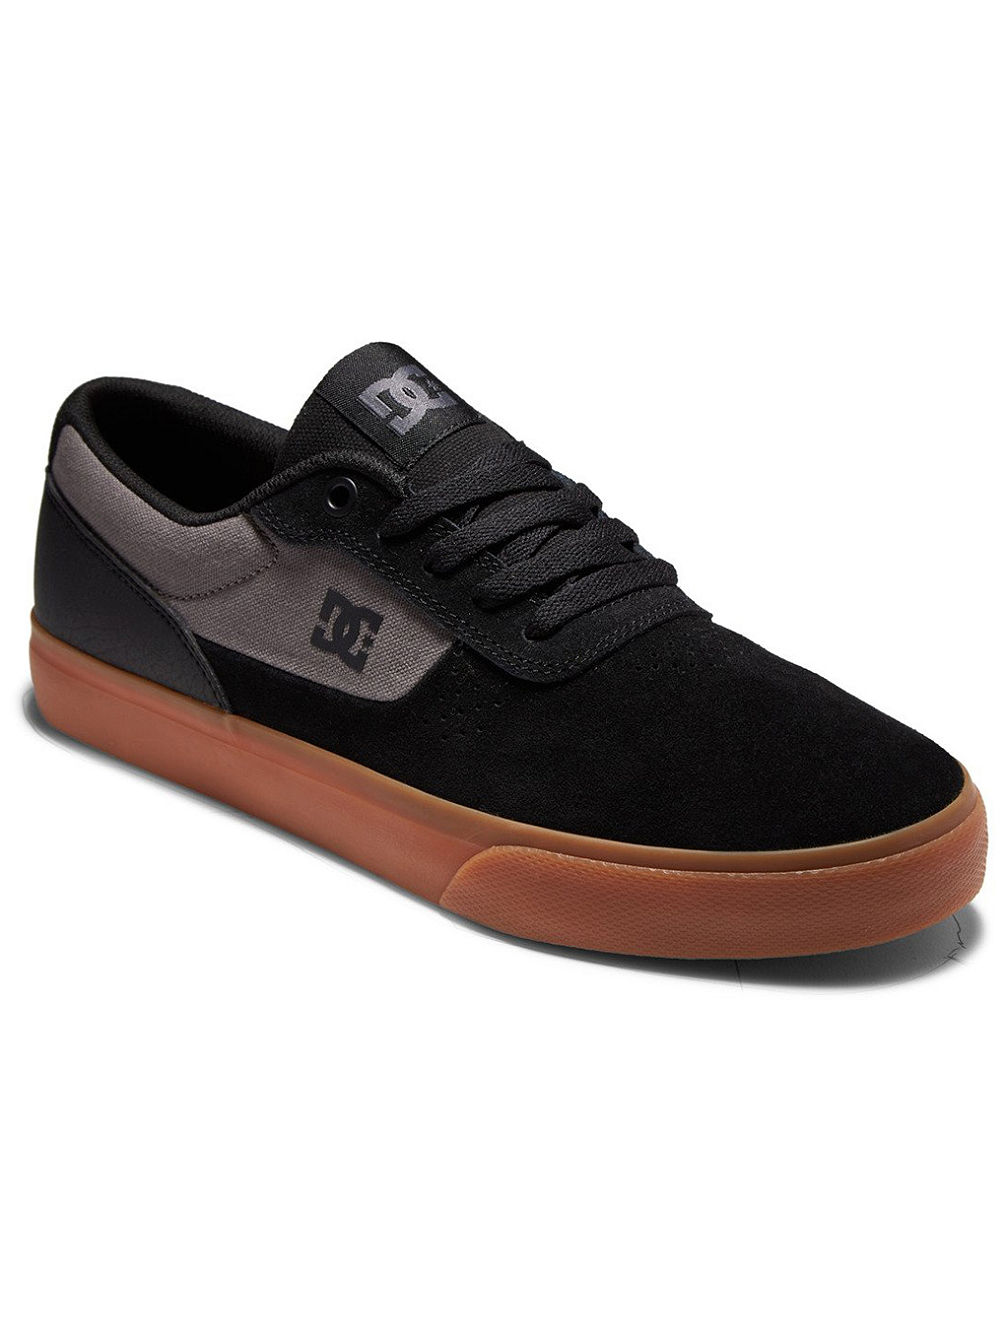 Switch Chaussures de Skate